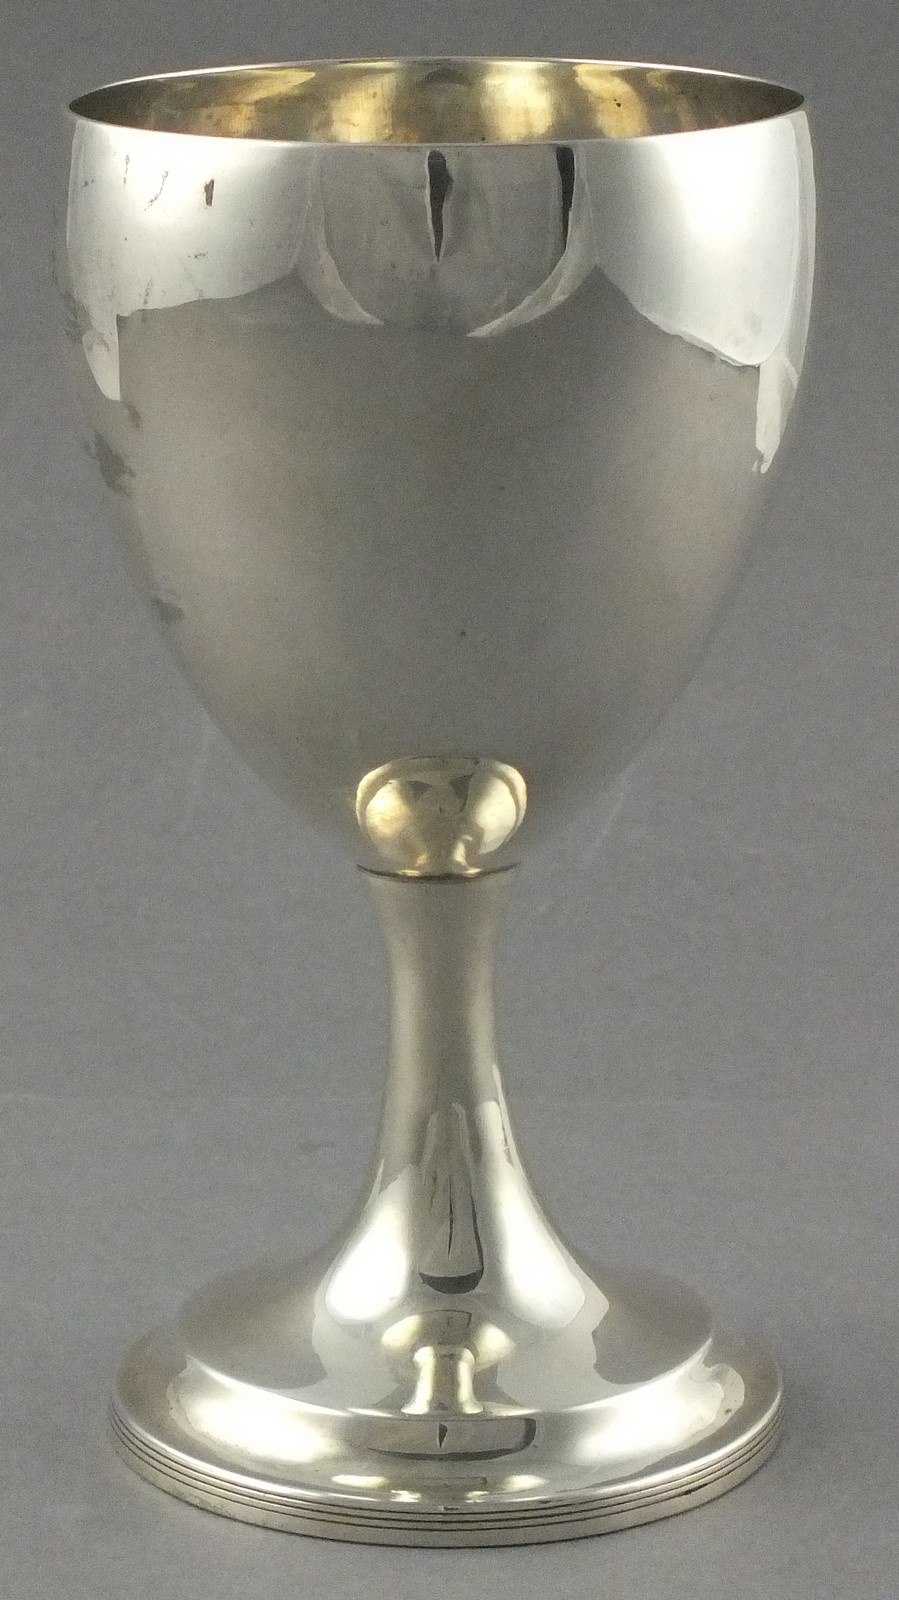 A George III silver goblet, Dublin 1800 - Joseph Jackson, of plain tapering form with a circular